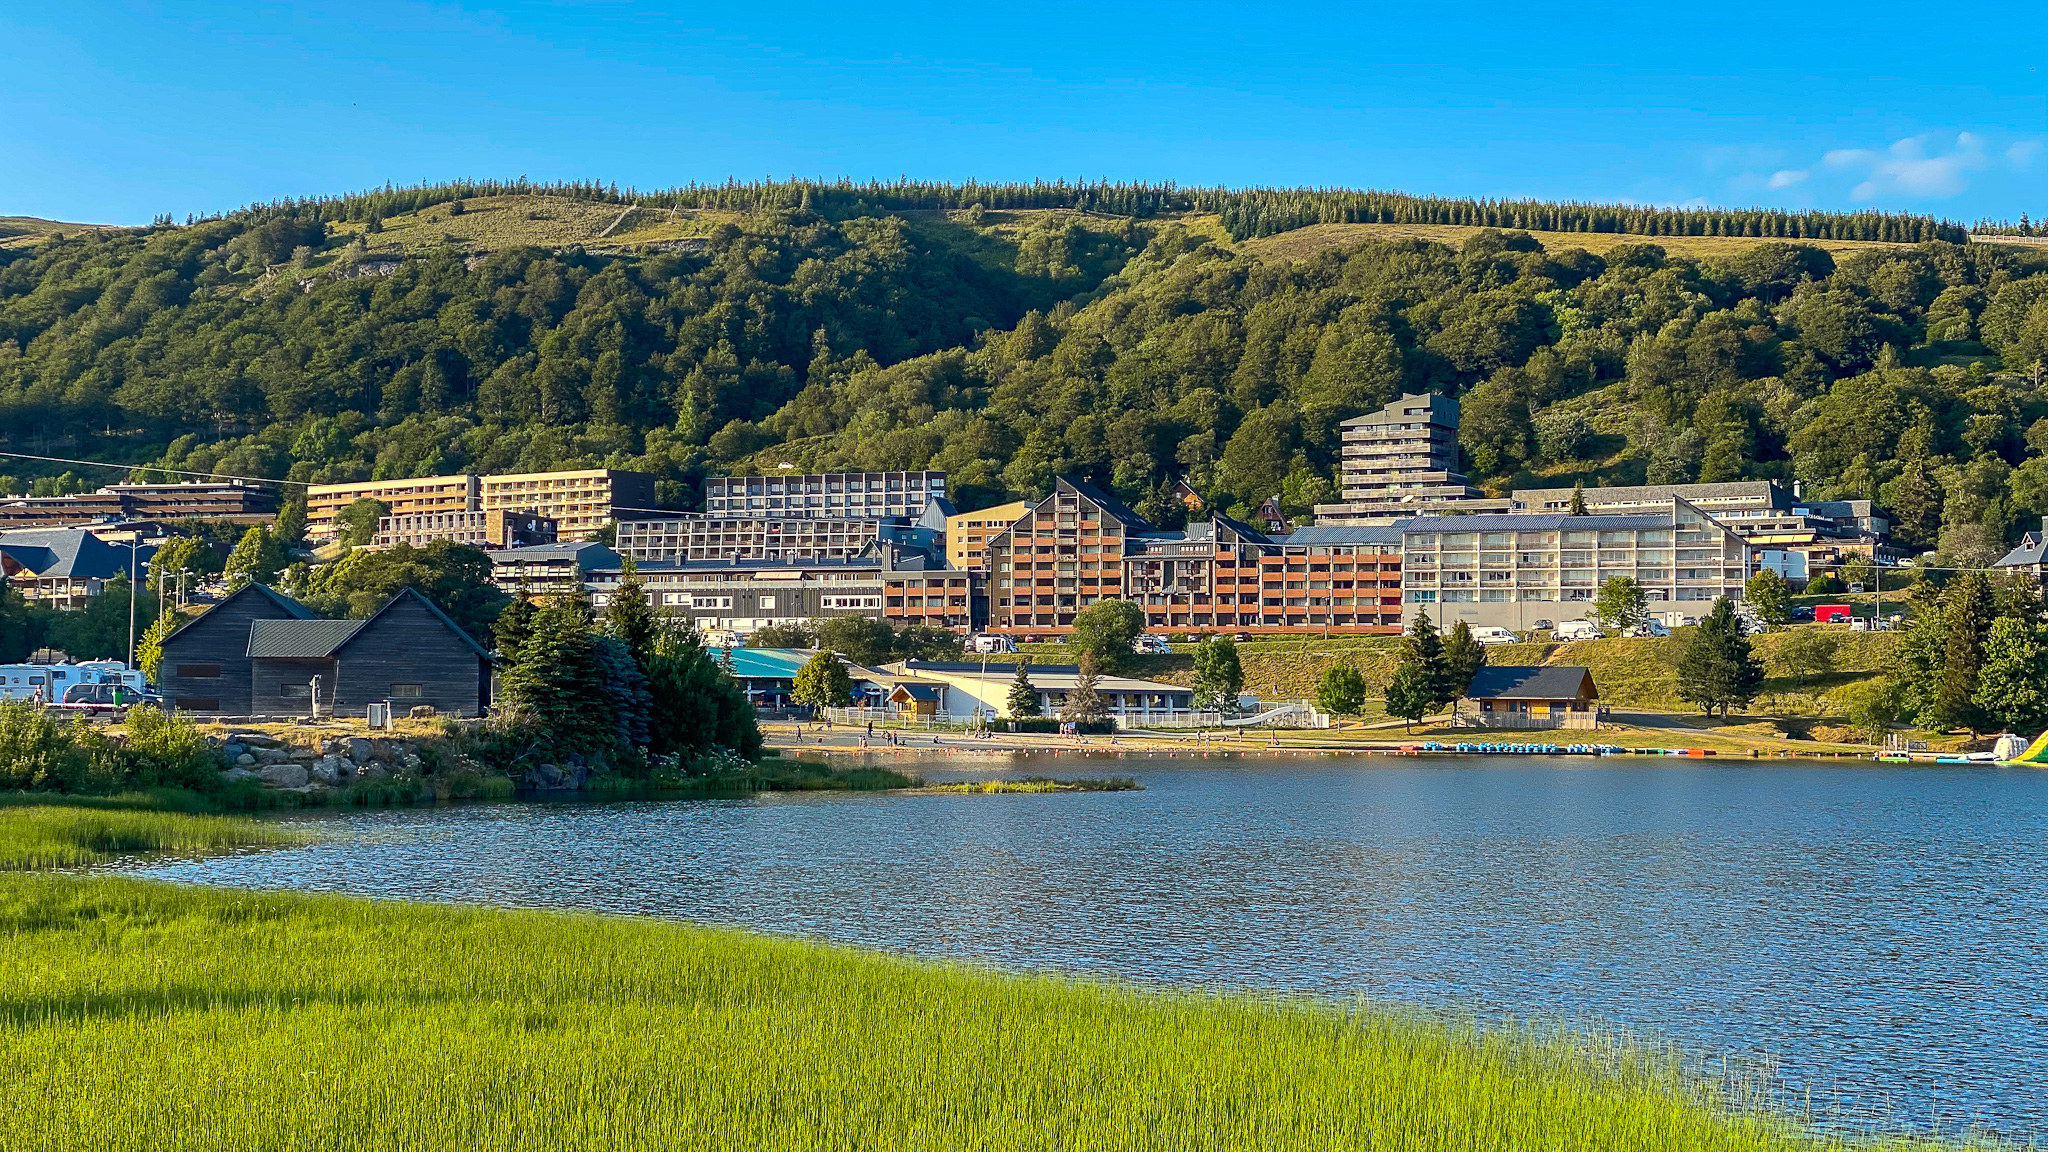 Super Besse, the resort and Lac des Hermines